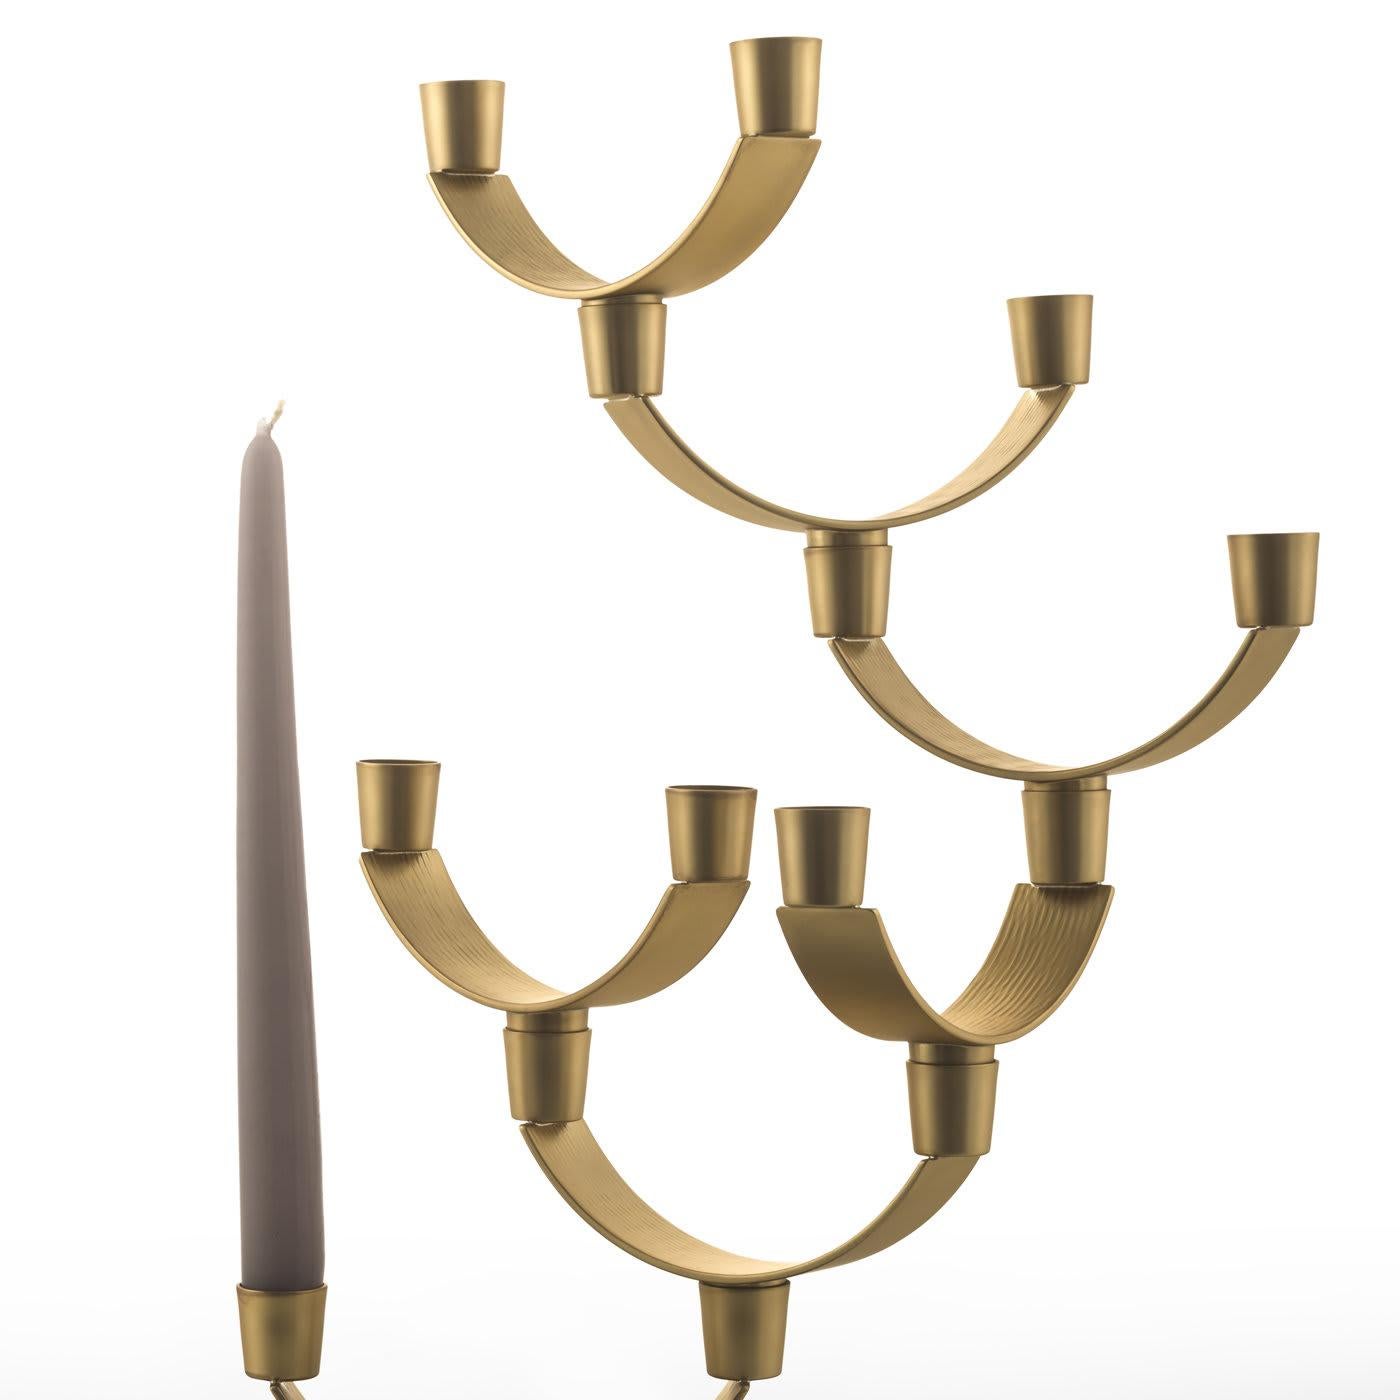 This striking piece is made entirely in brass with two different finishes: the rectangular base is bronzed while the seven semi-circular branches and mouths have a satin finish. The combination of these two hues and the geometric silhouette created